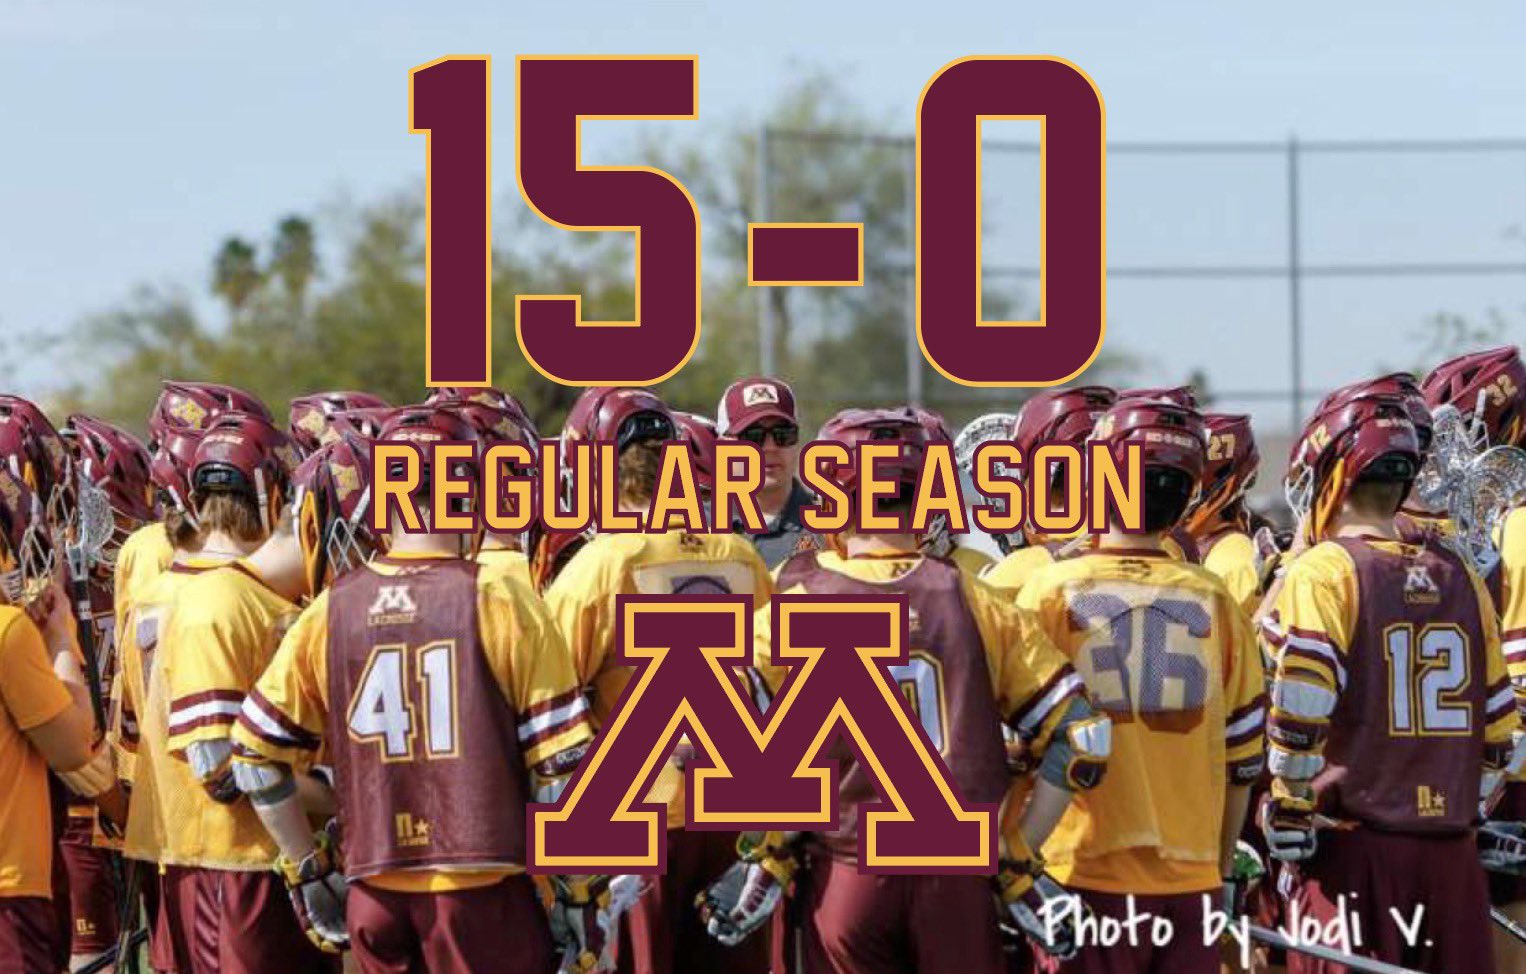 About Gopher Lax